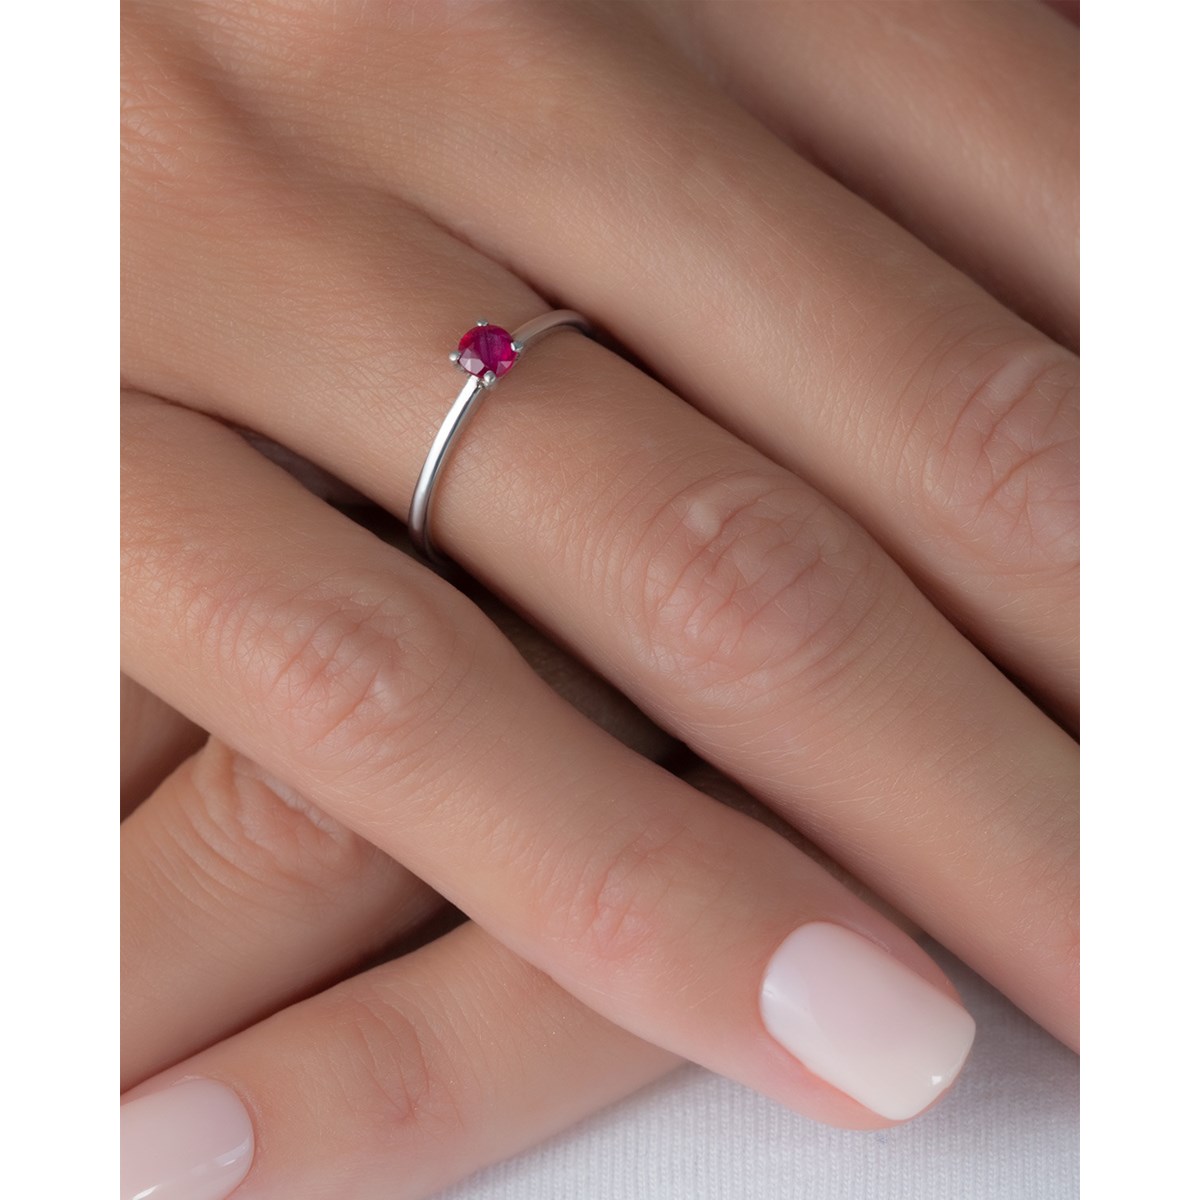 Bague ADEN Solitaire Or 585 Blanc Rubis 1.59grs - vue 3